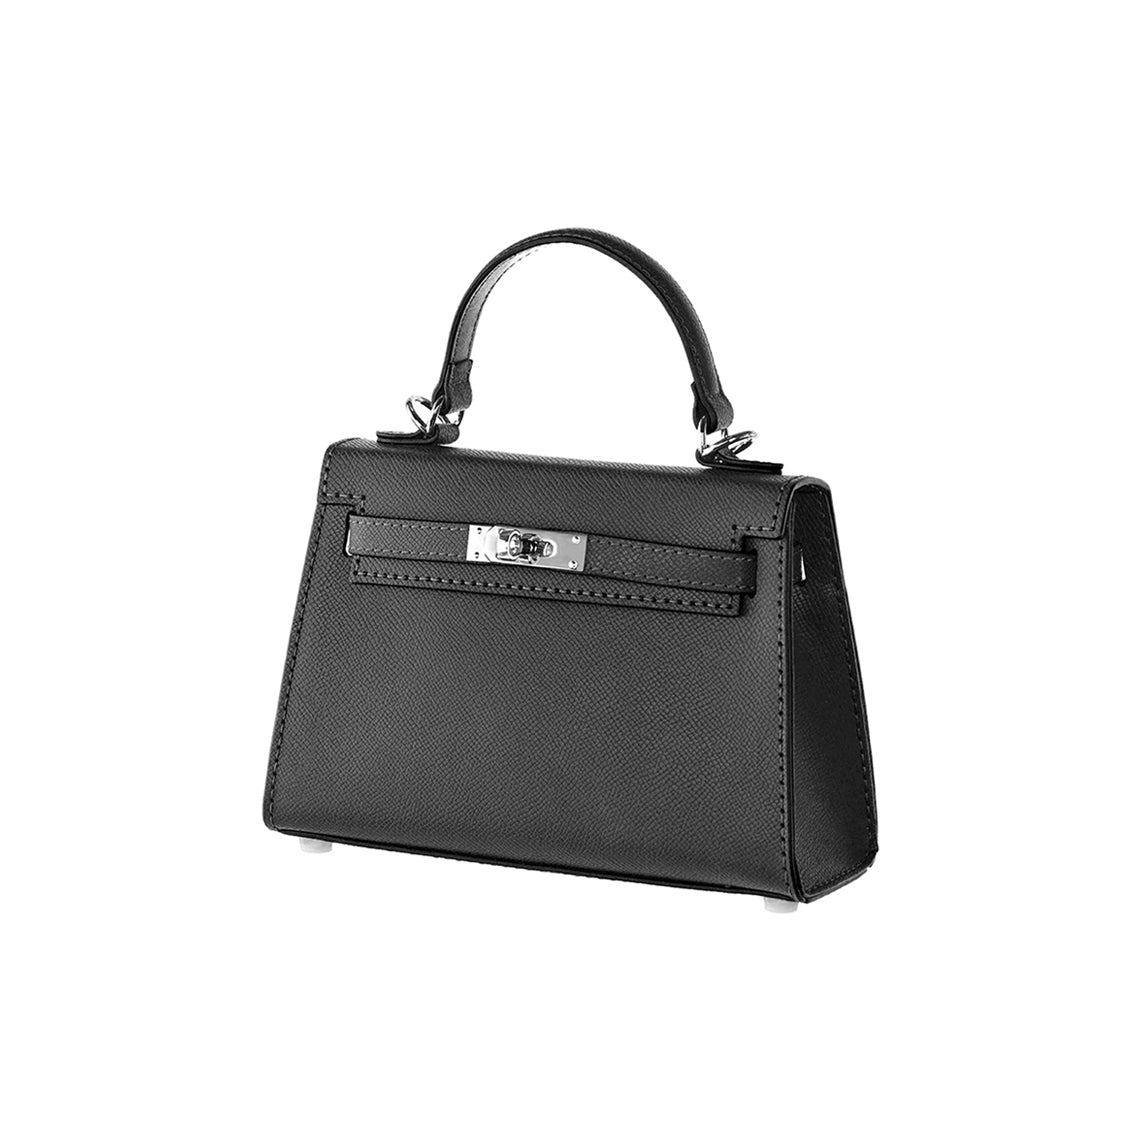 POPSEWING® Top Grain Leather Inspired Sellier Kylie Bag DIY Kit | 25% Price Drop at Checkout